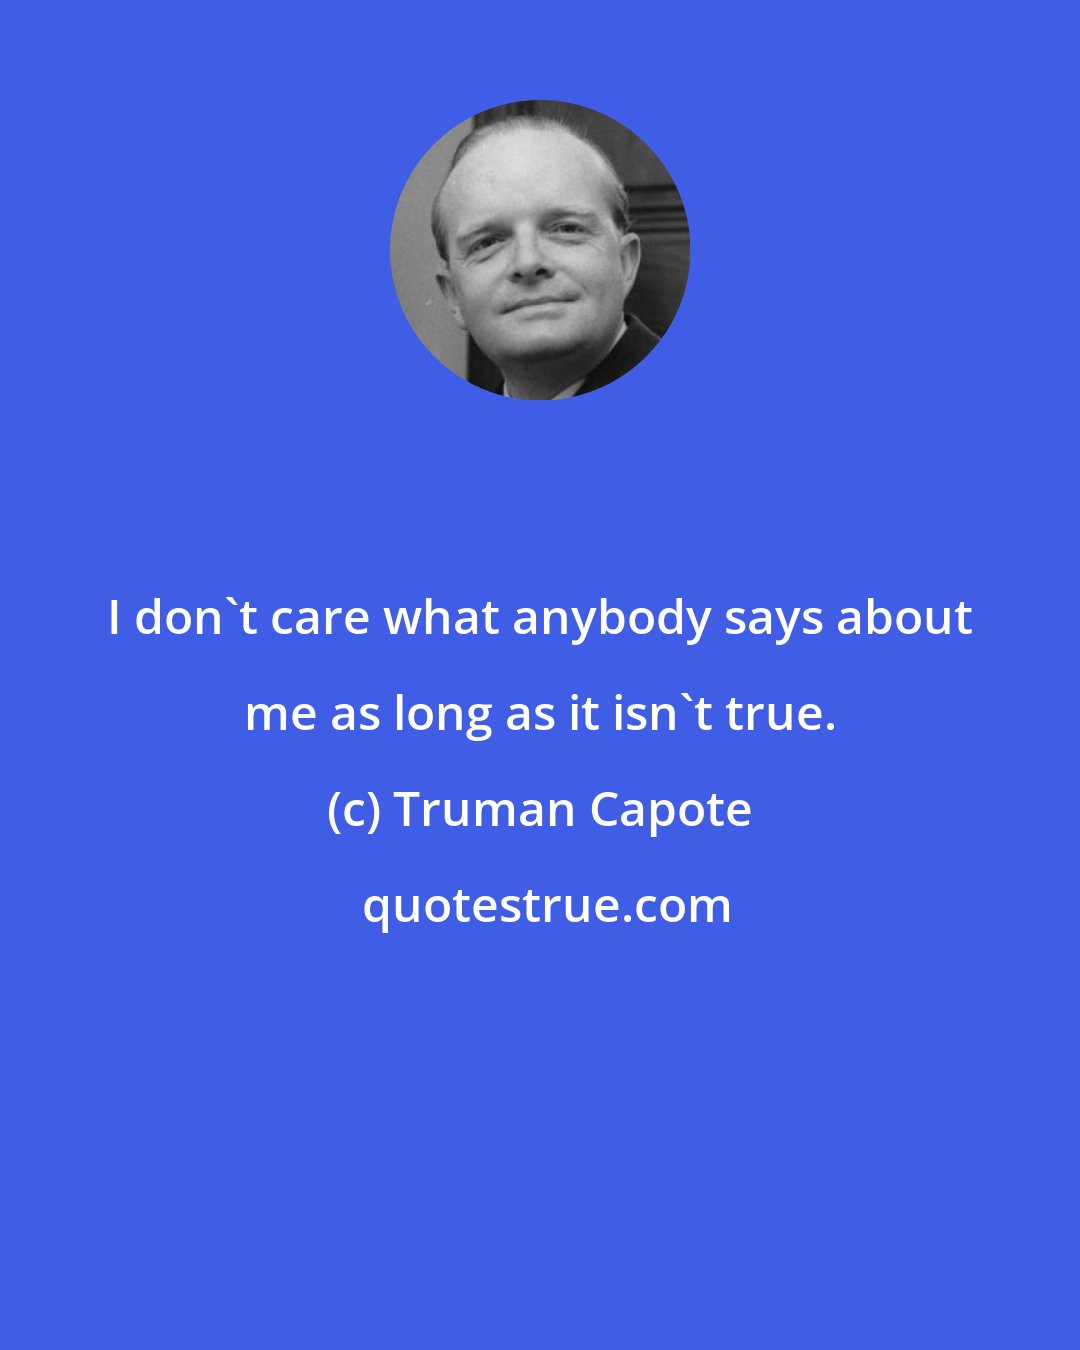 Truman Capote: I don't care what anybody says about me as long as it isn't true.